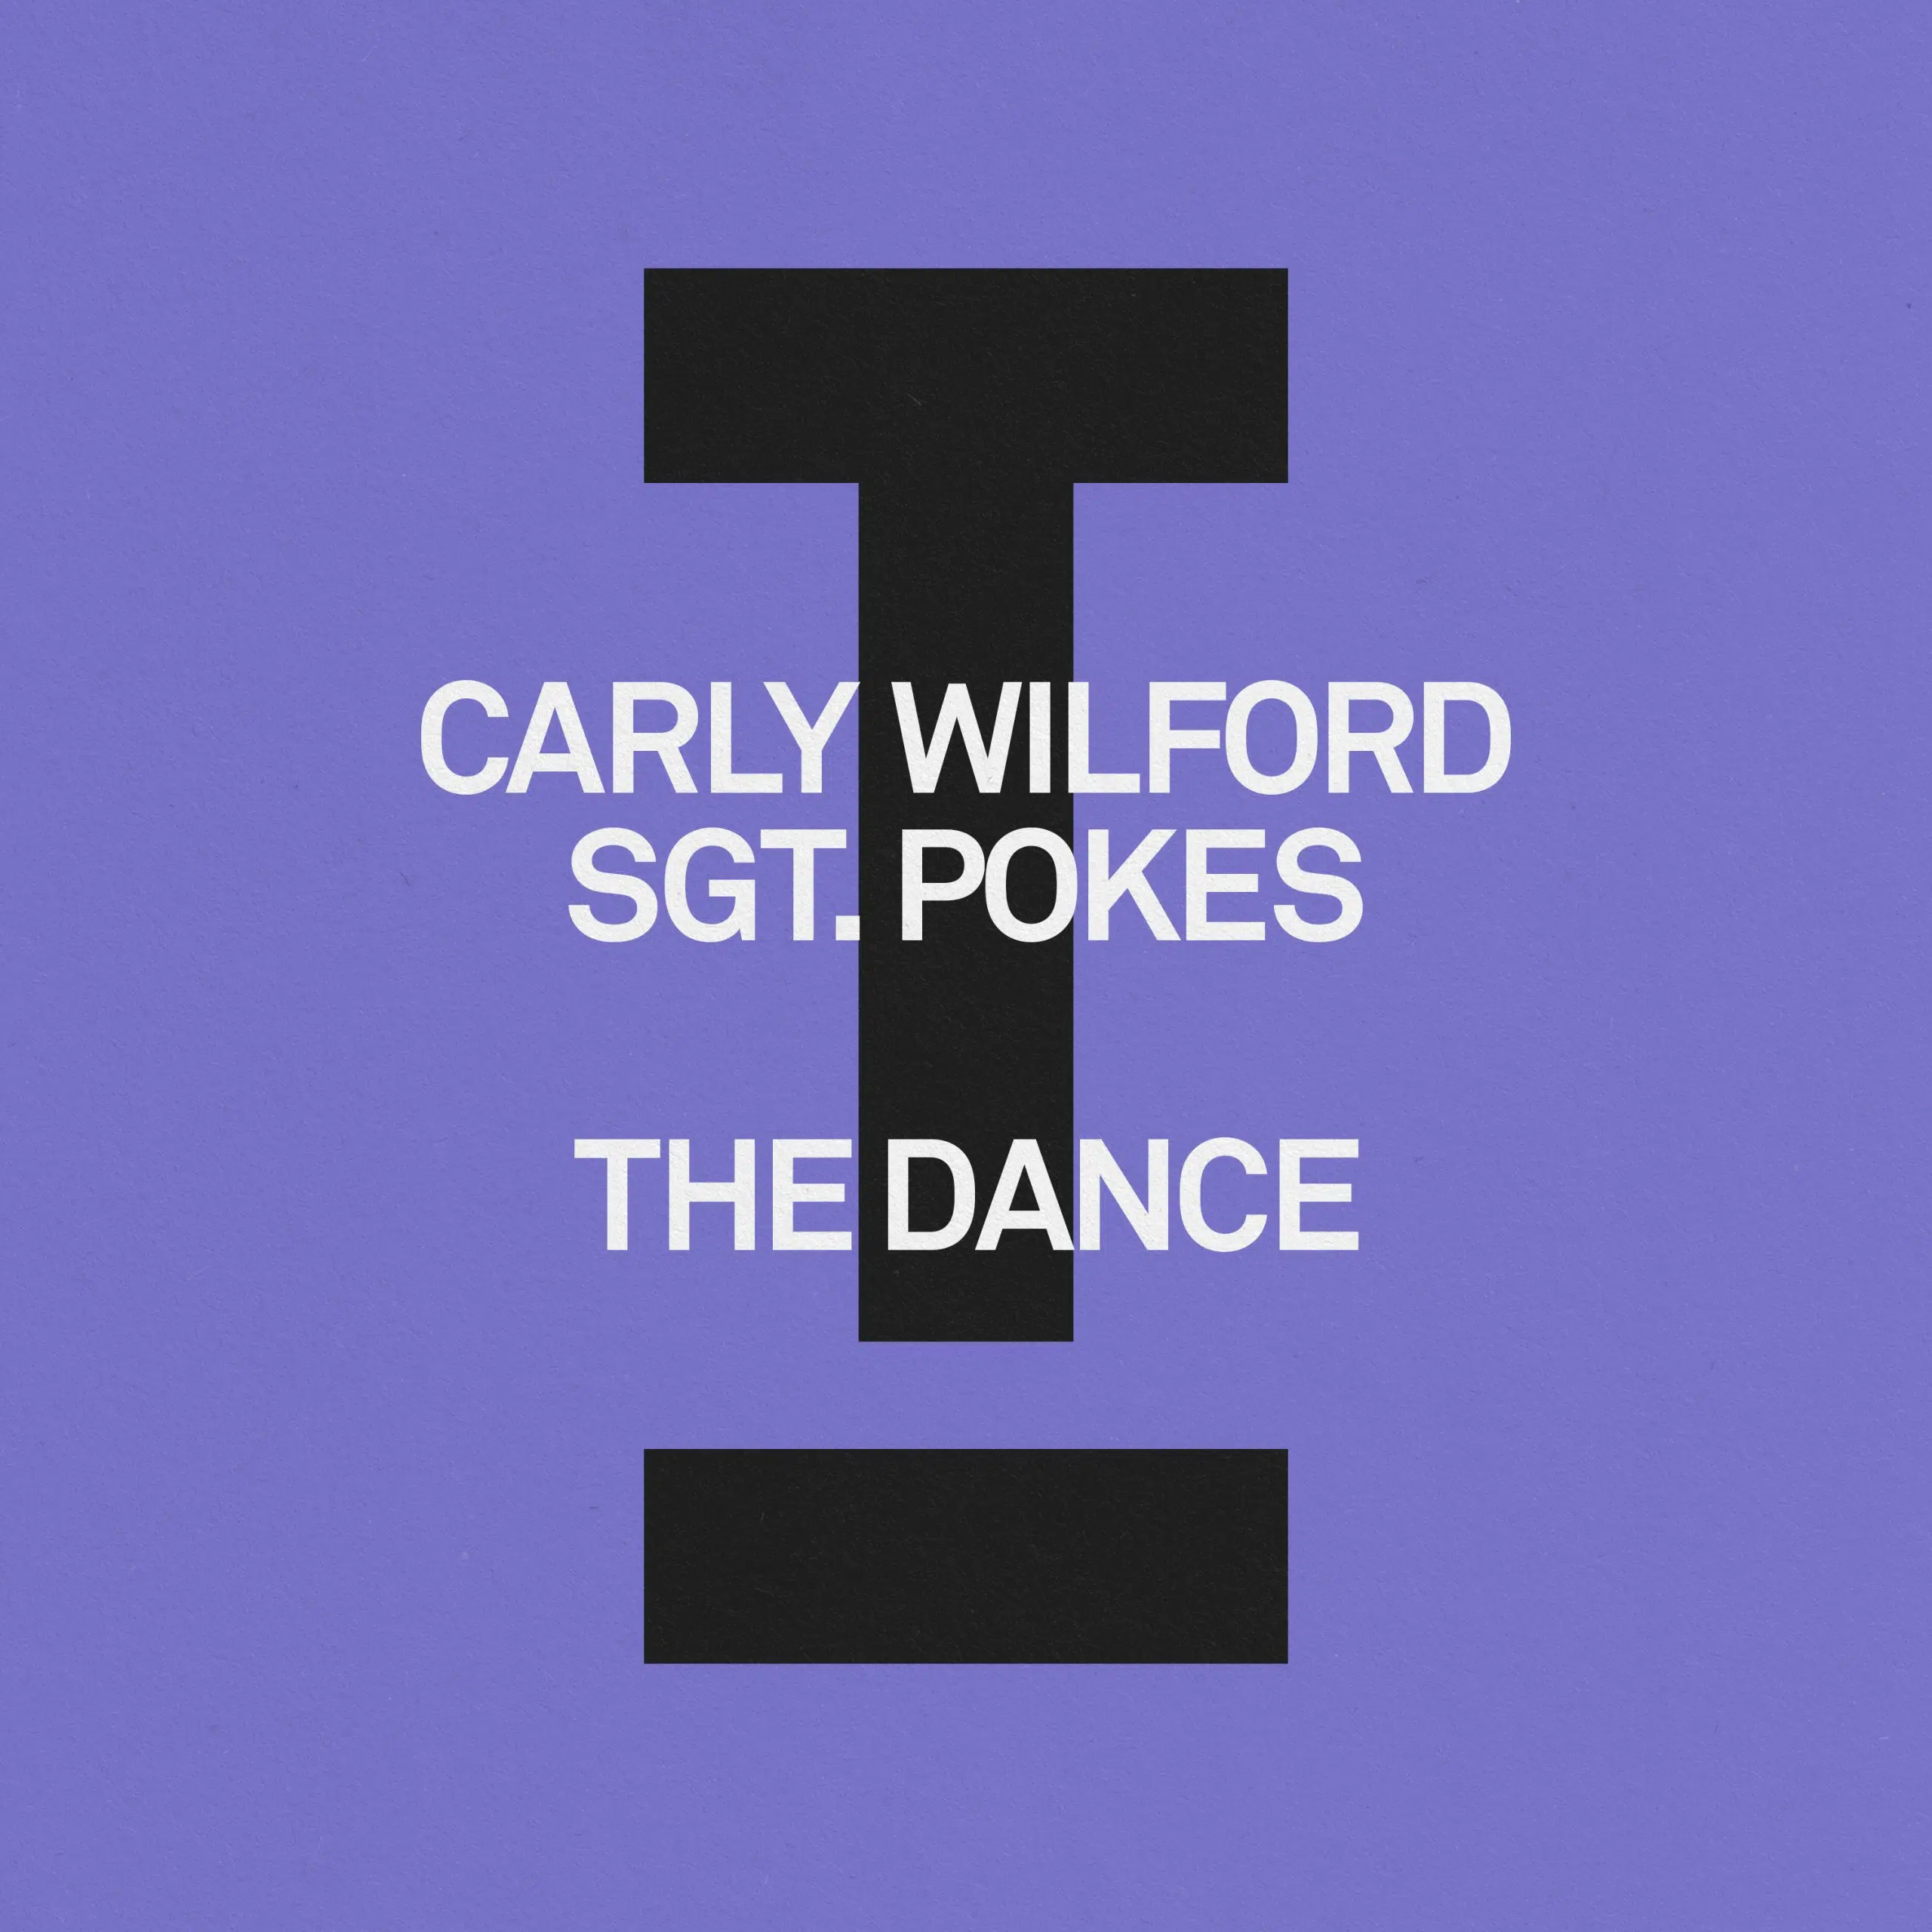 Carly Wilford, SGT. Pokes “The Dance”